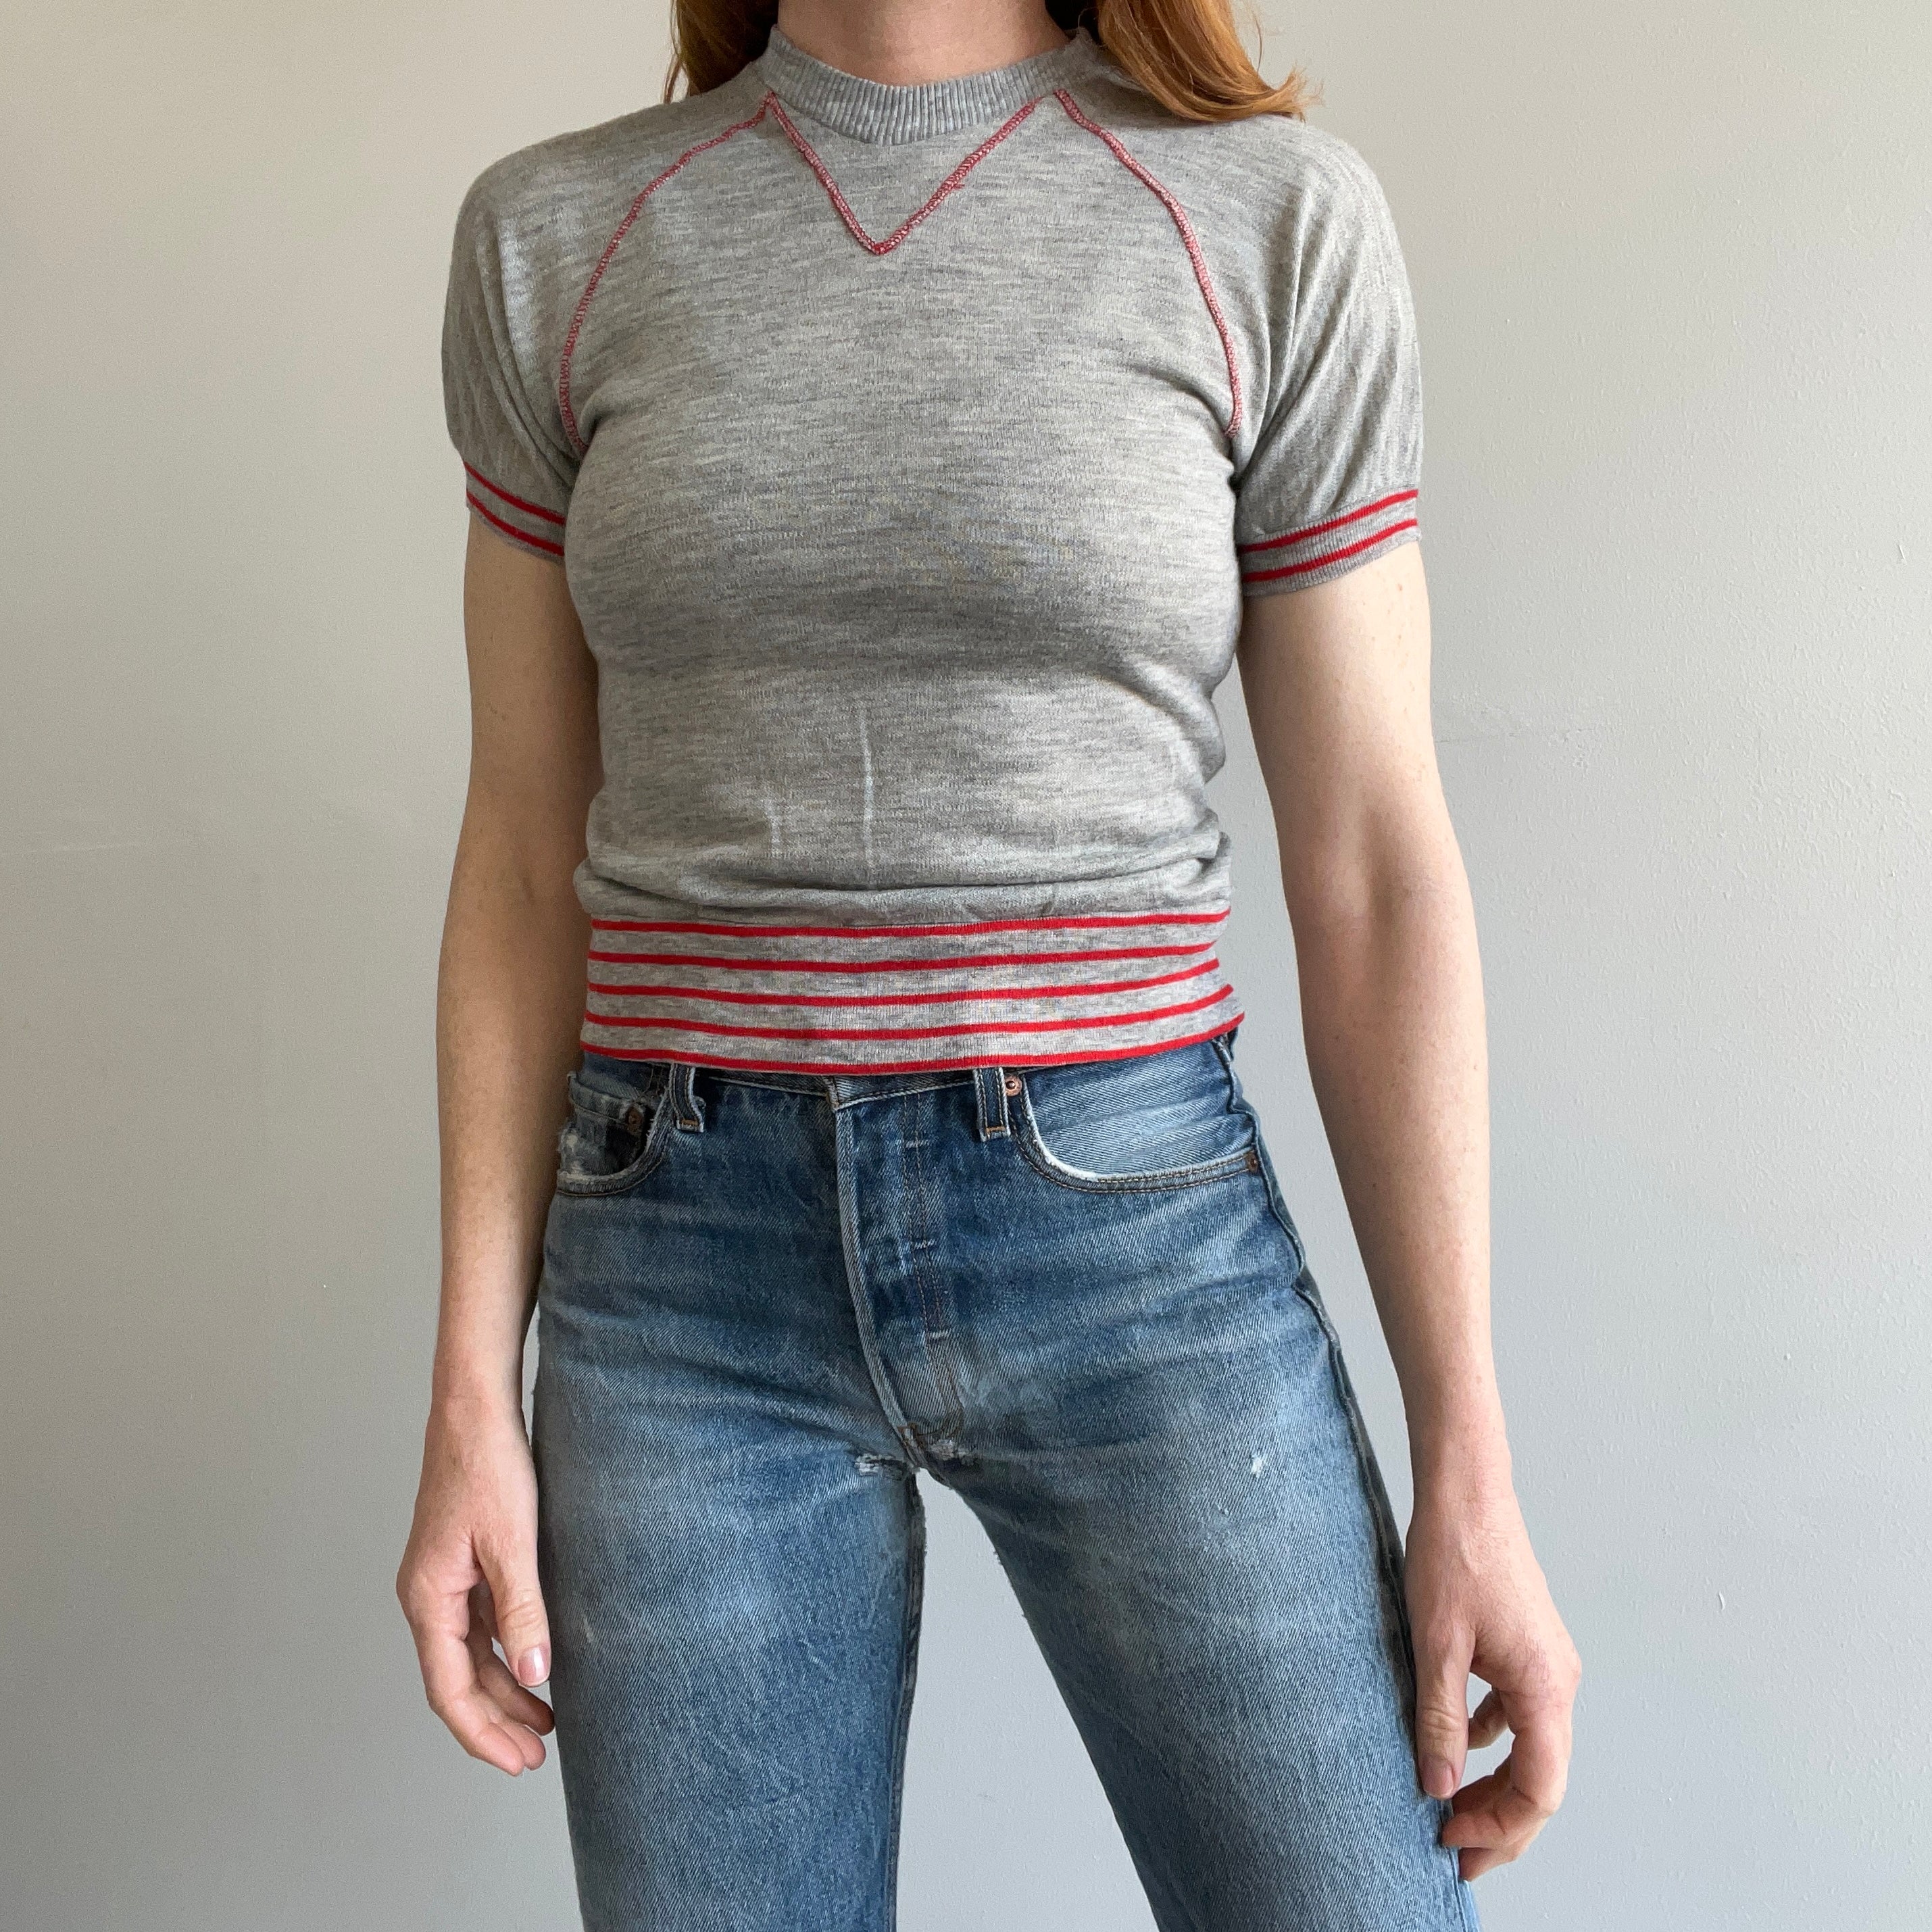 1970s Super Lightweight and Thin Warm Up with Red Contrast Stitching